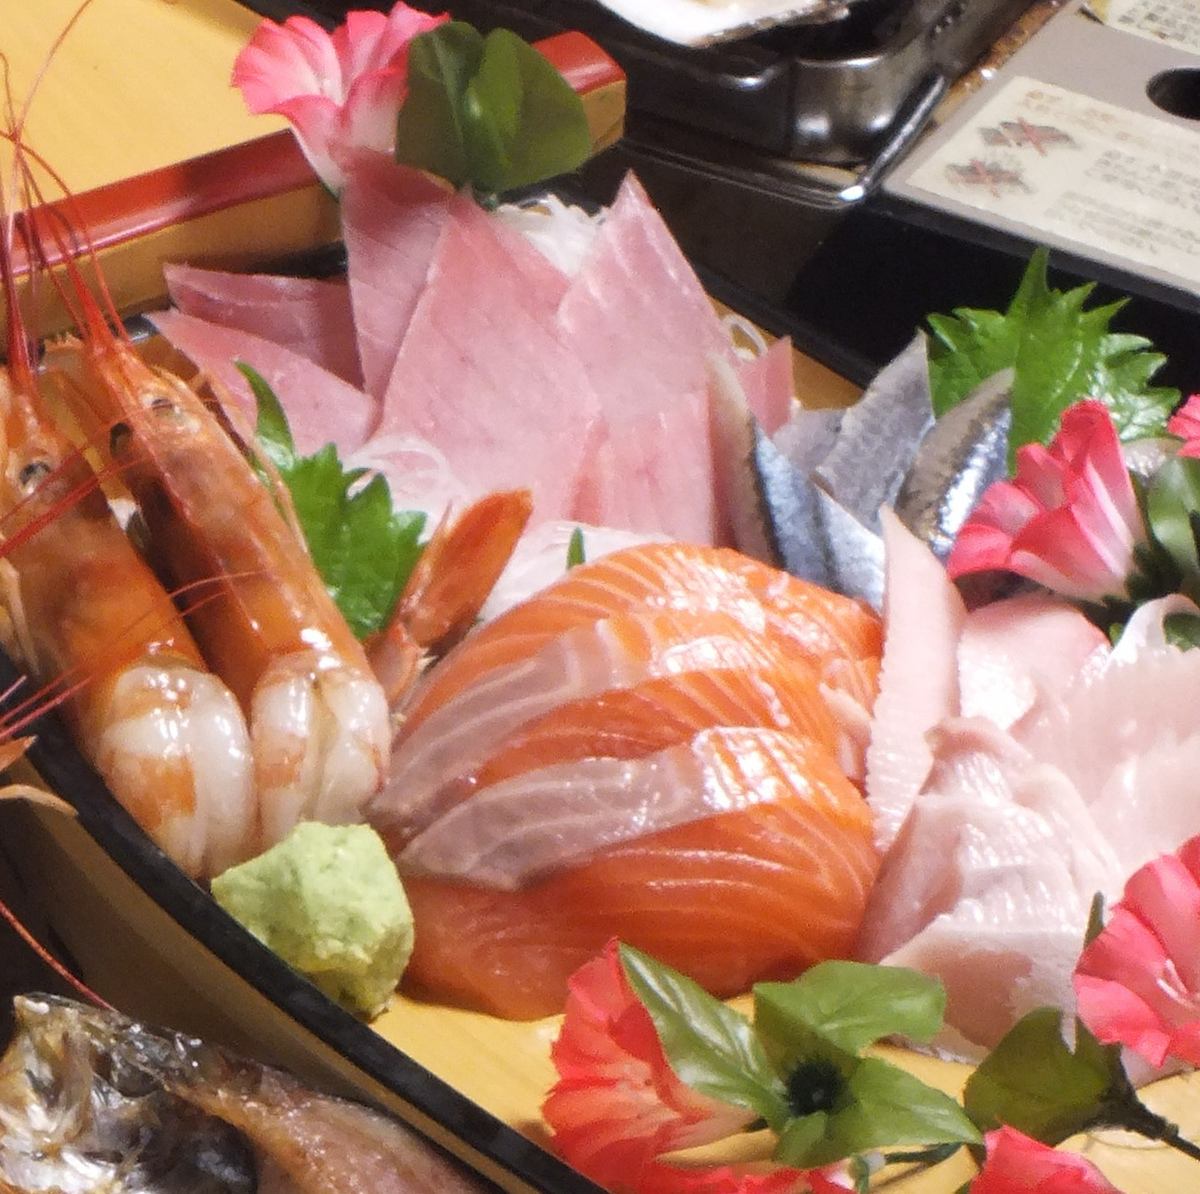 Get ready for a deficit! 10 oyster gift coupons are back! Try fresh Hokkaido seafood at our store!